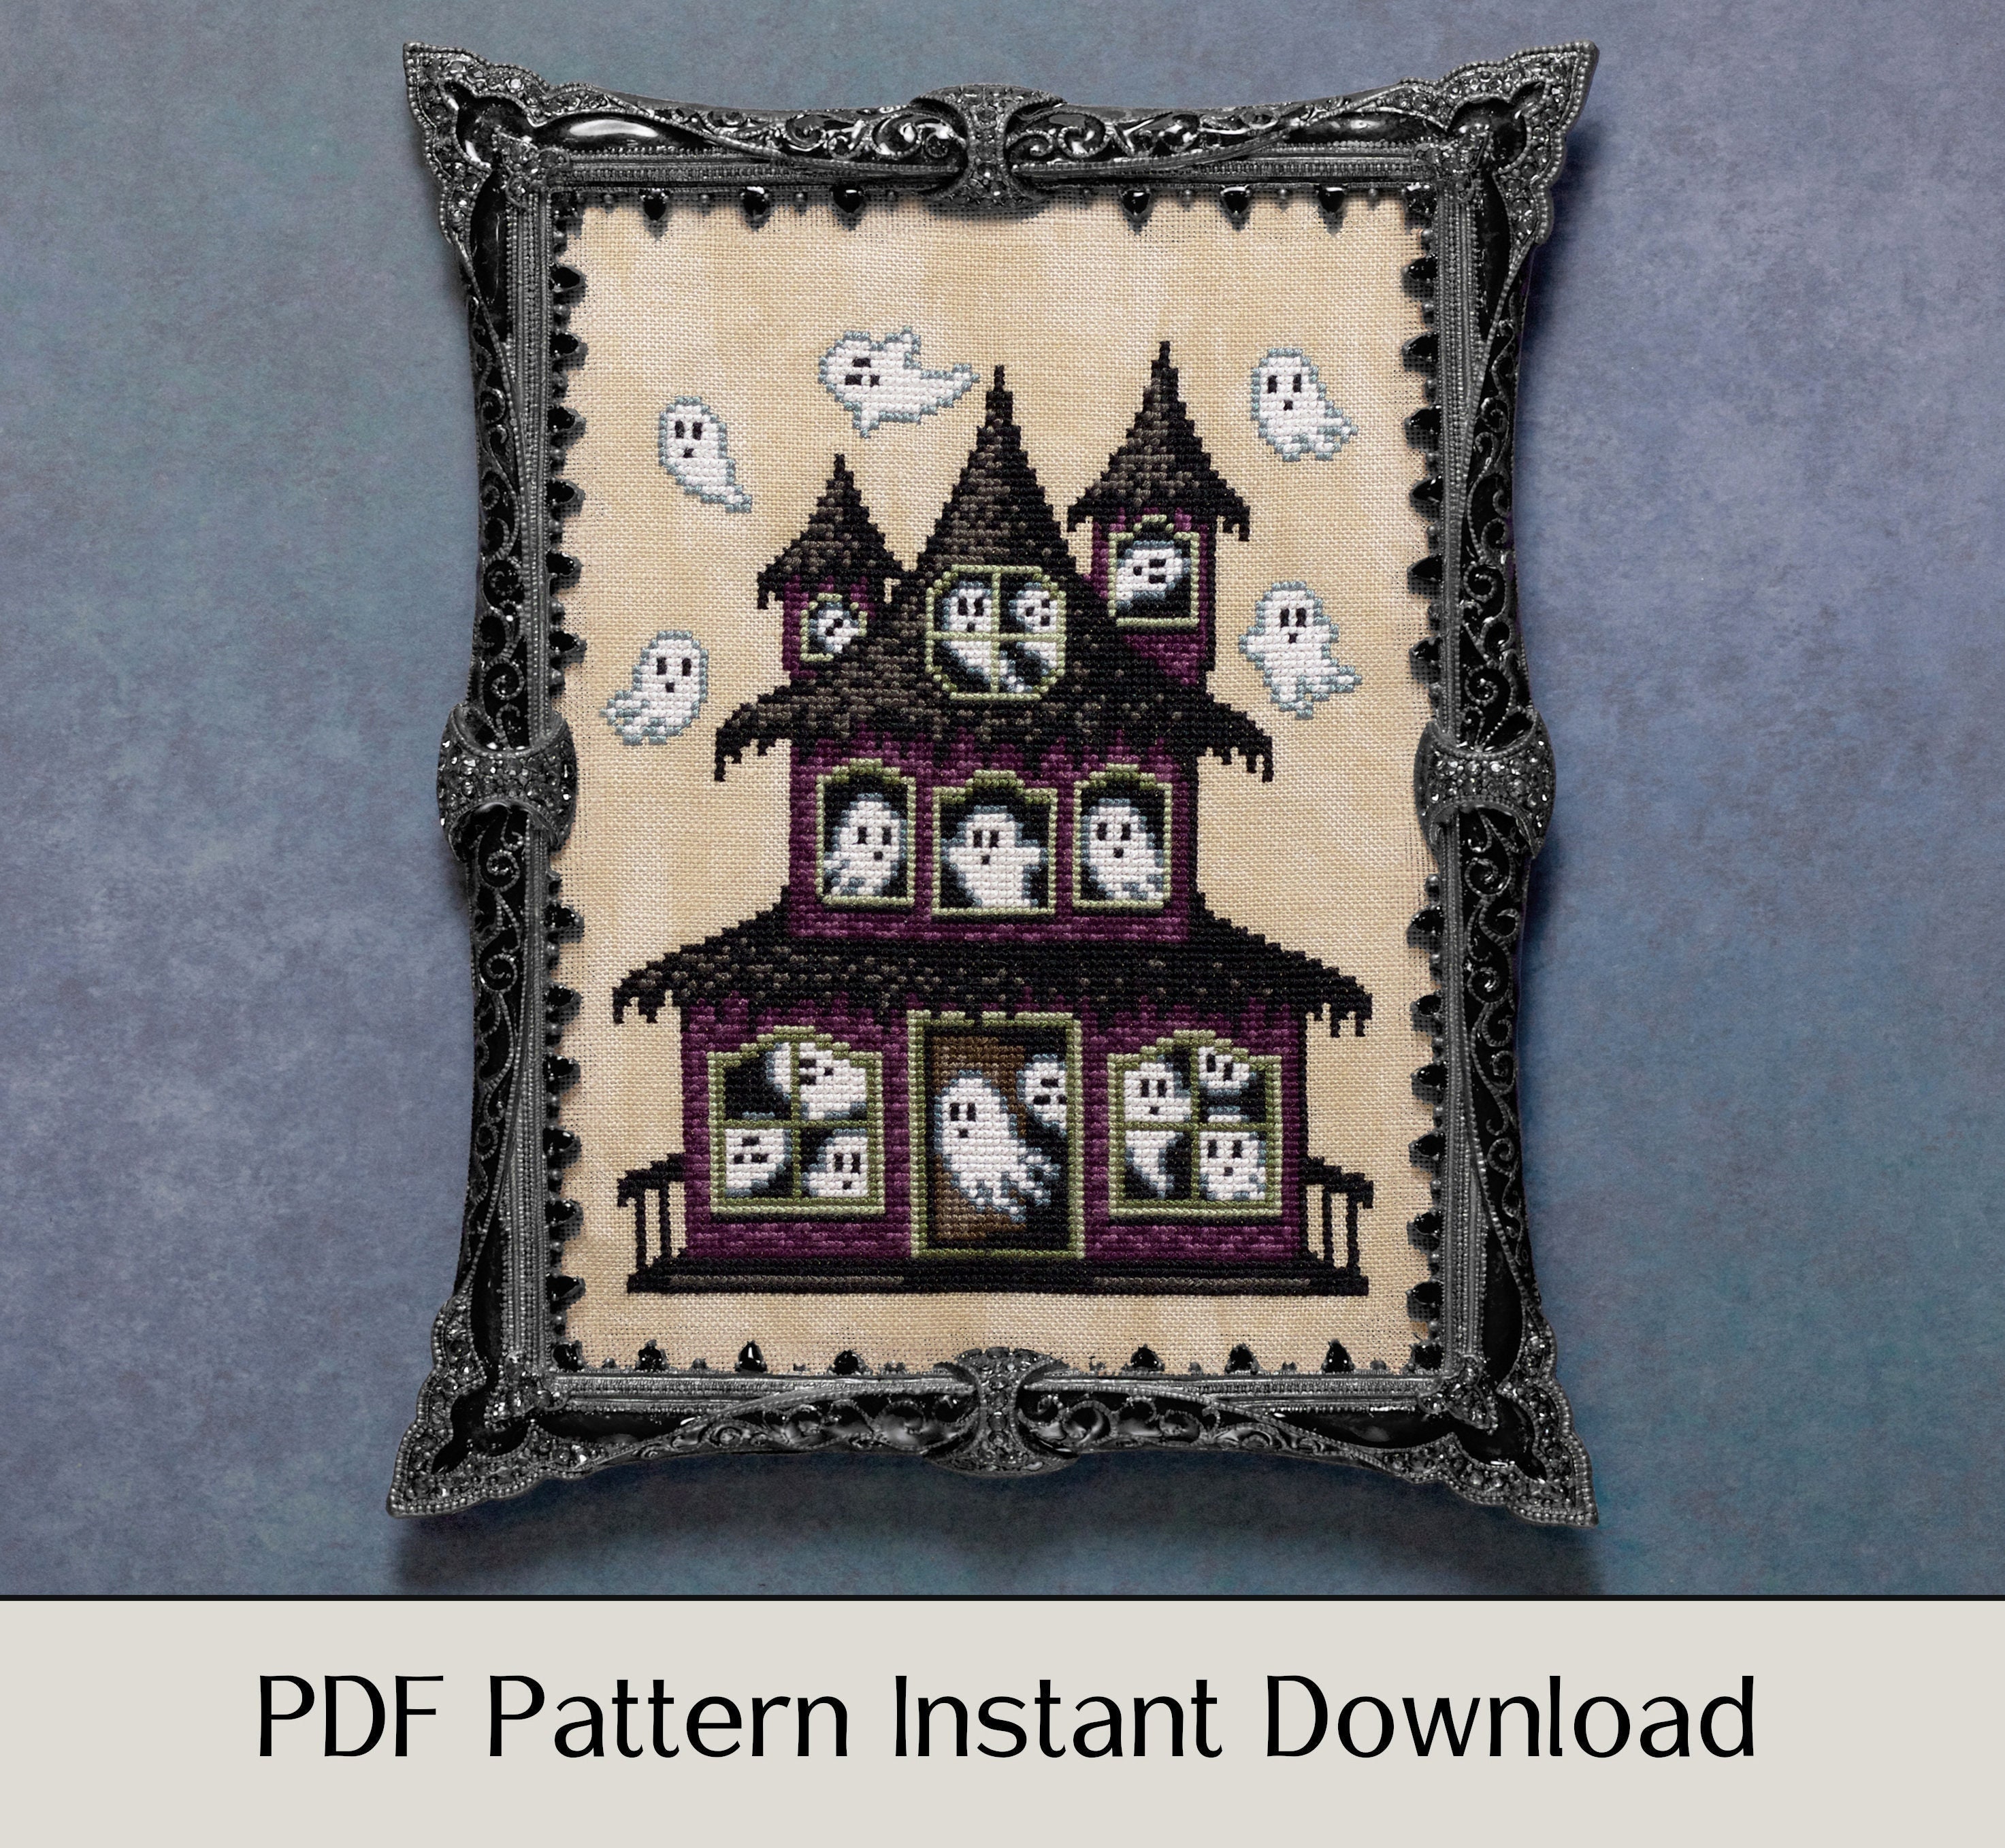 Spooky Stitches  Full Color Counted Cross Stitch Pattern Book